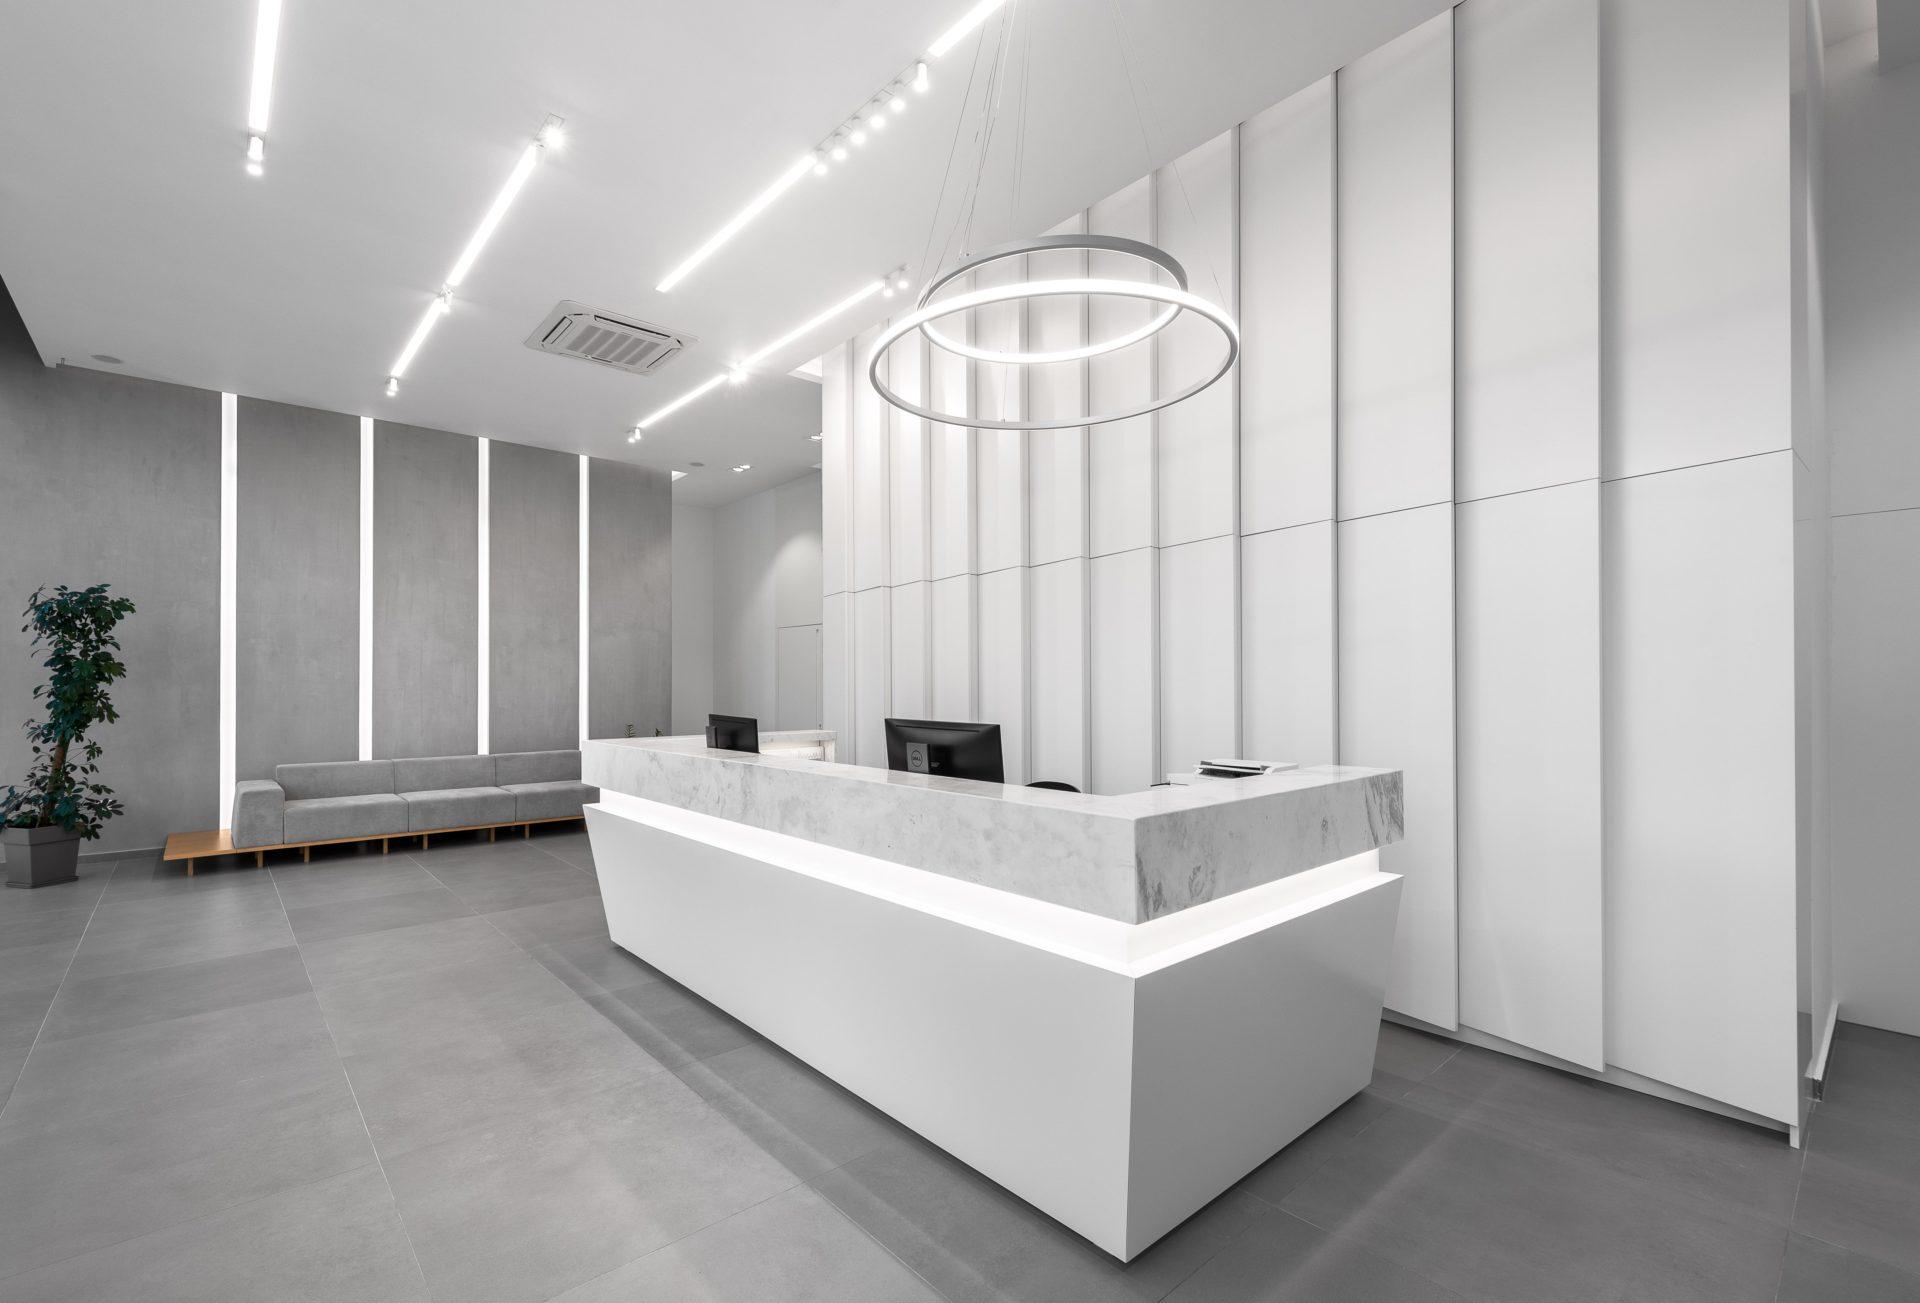 OPSIS DENTAL & RADIOLOGICAL CENTER - T.SQUAREARCHITECTS Architectural Office tsquarearchitects.gr